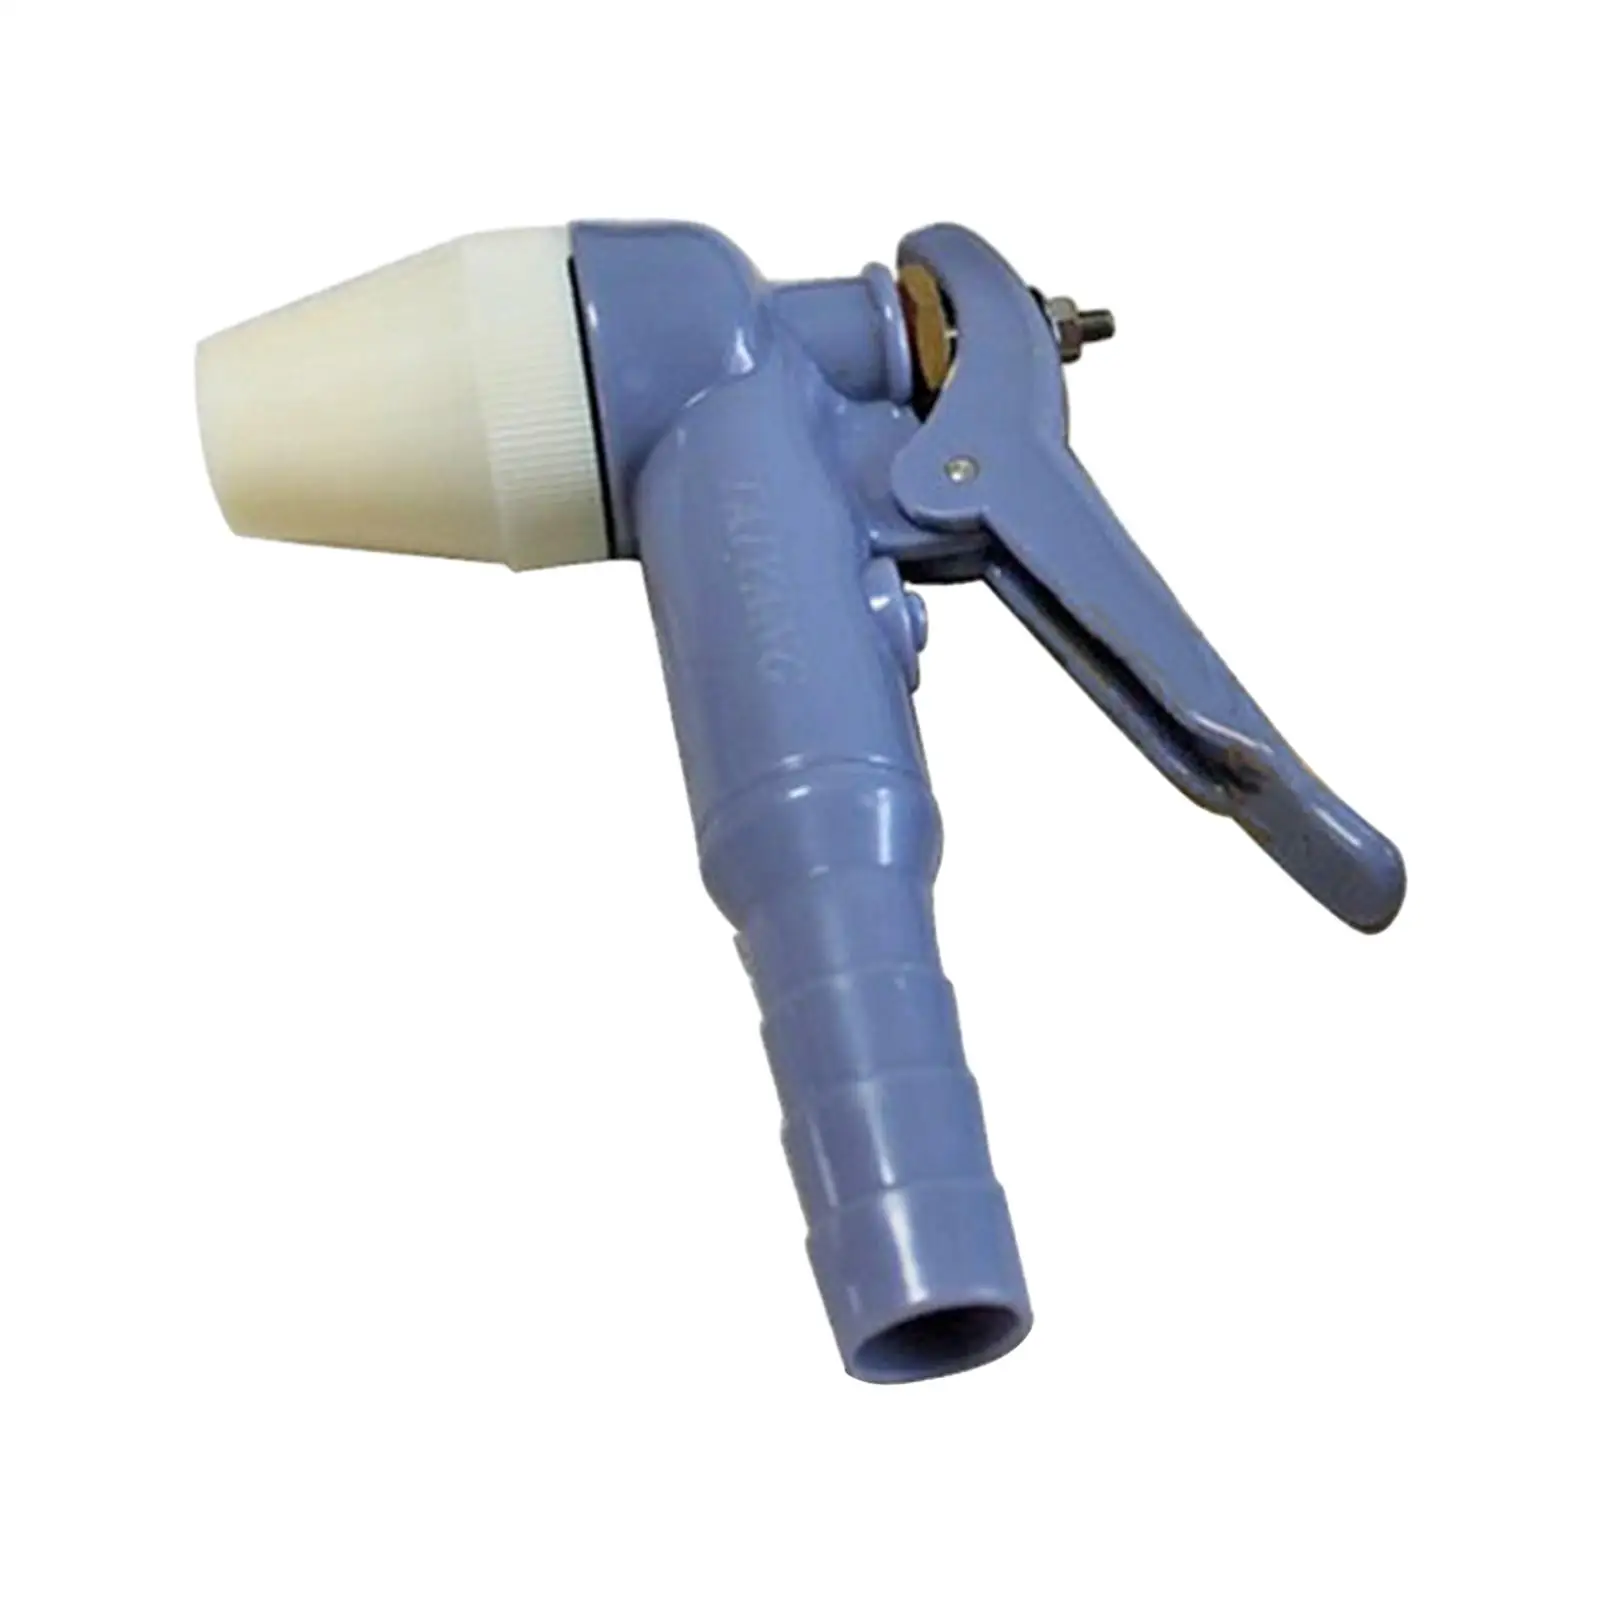 Mortar Grouting Gun Replacable Nozzles Outdoor Indoor for Grouting Machine Pipeline Grouting Fitings Fast and Easy Grouting Gun